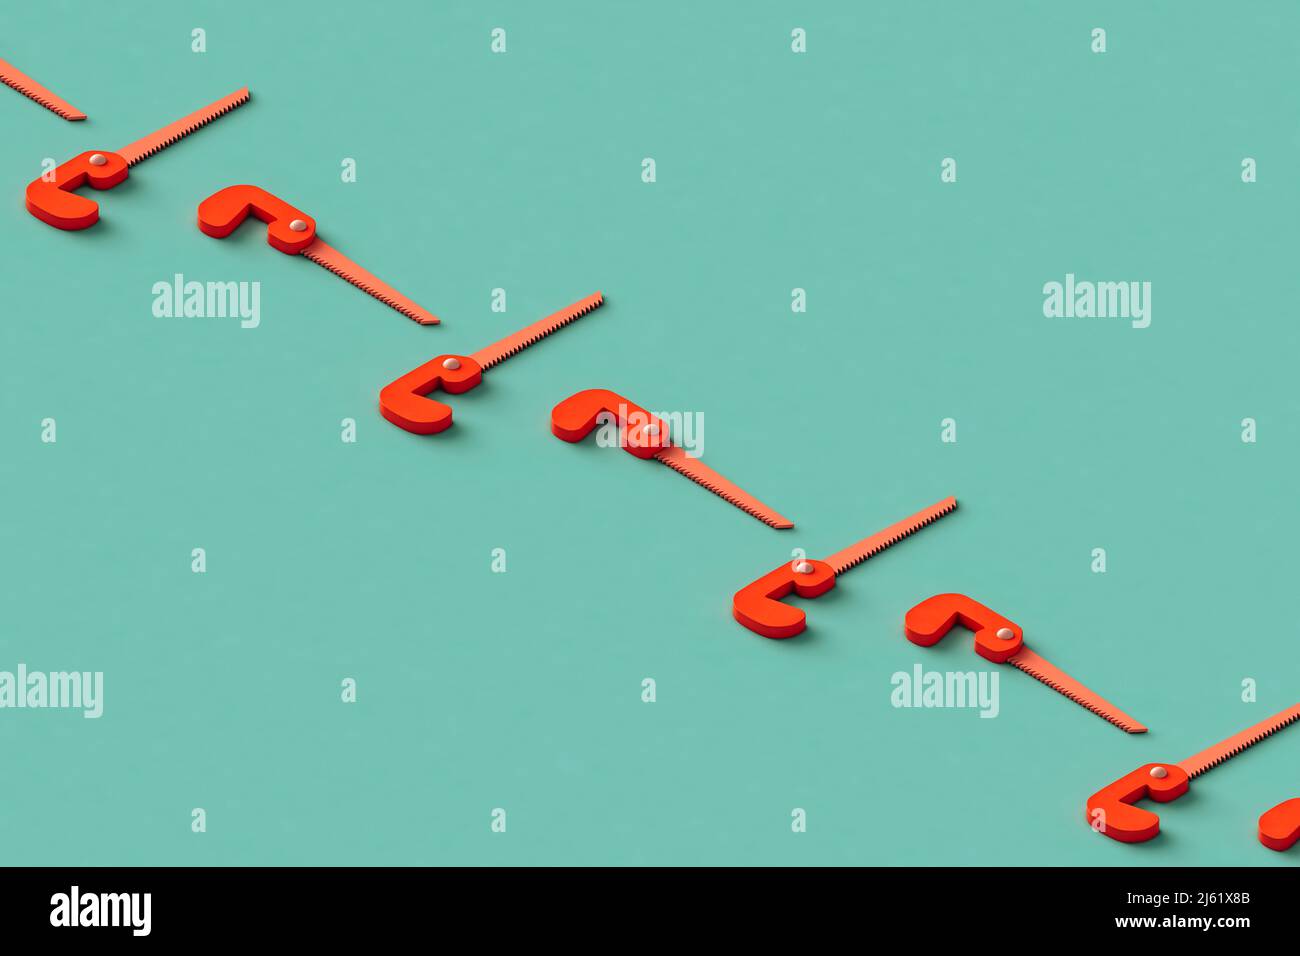 Three dimensional render of row of hand saws flat laid against green background Stock Photo